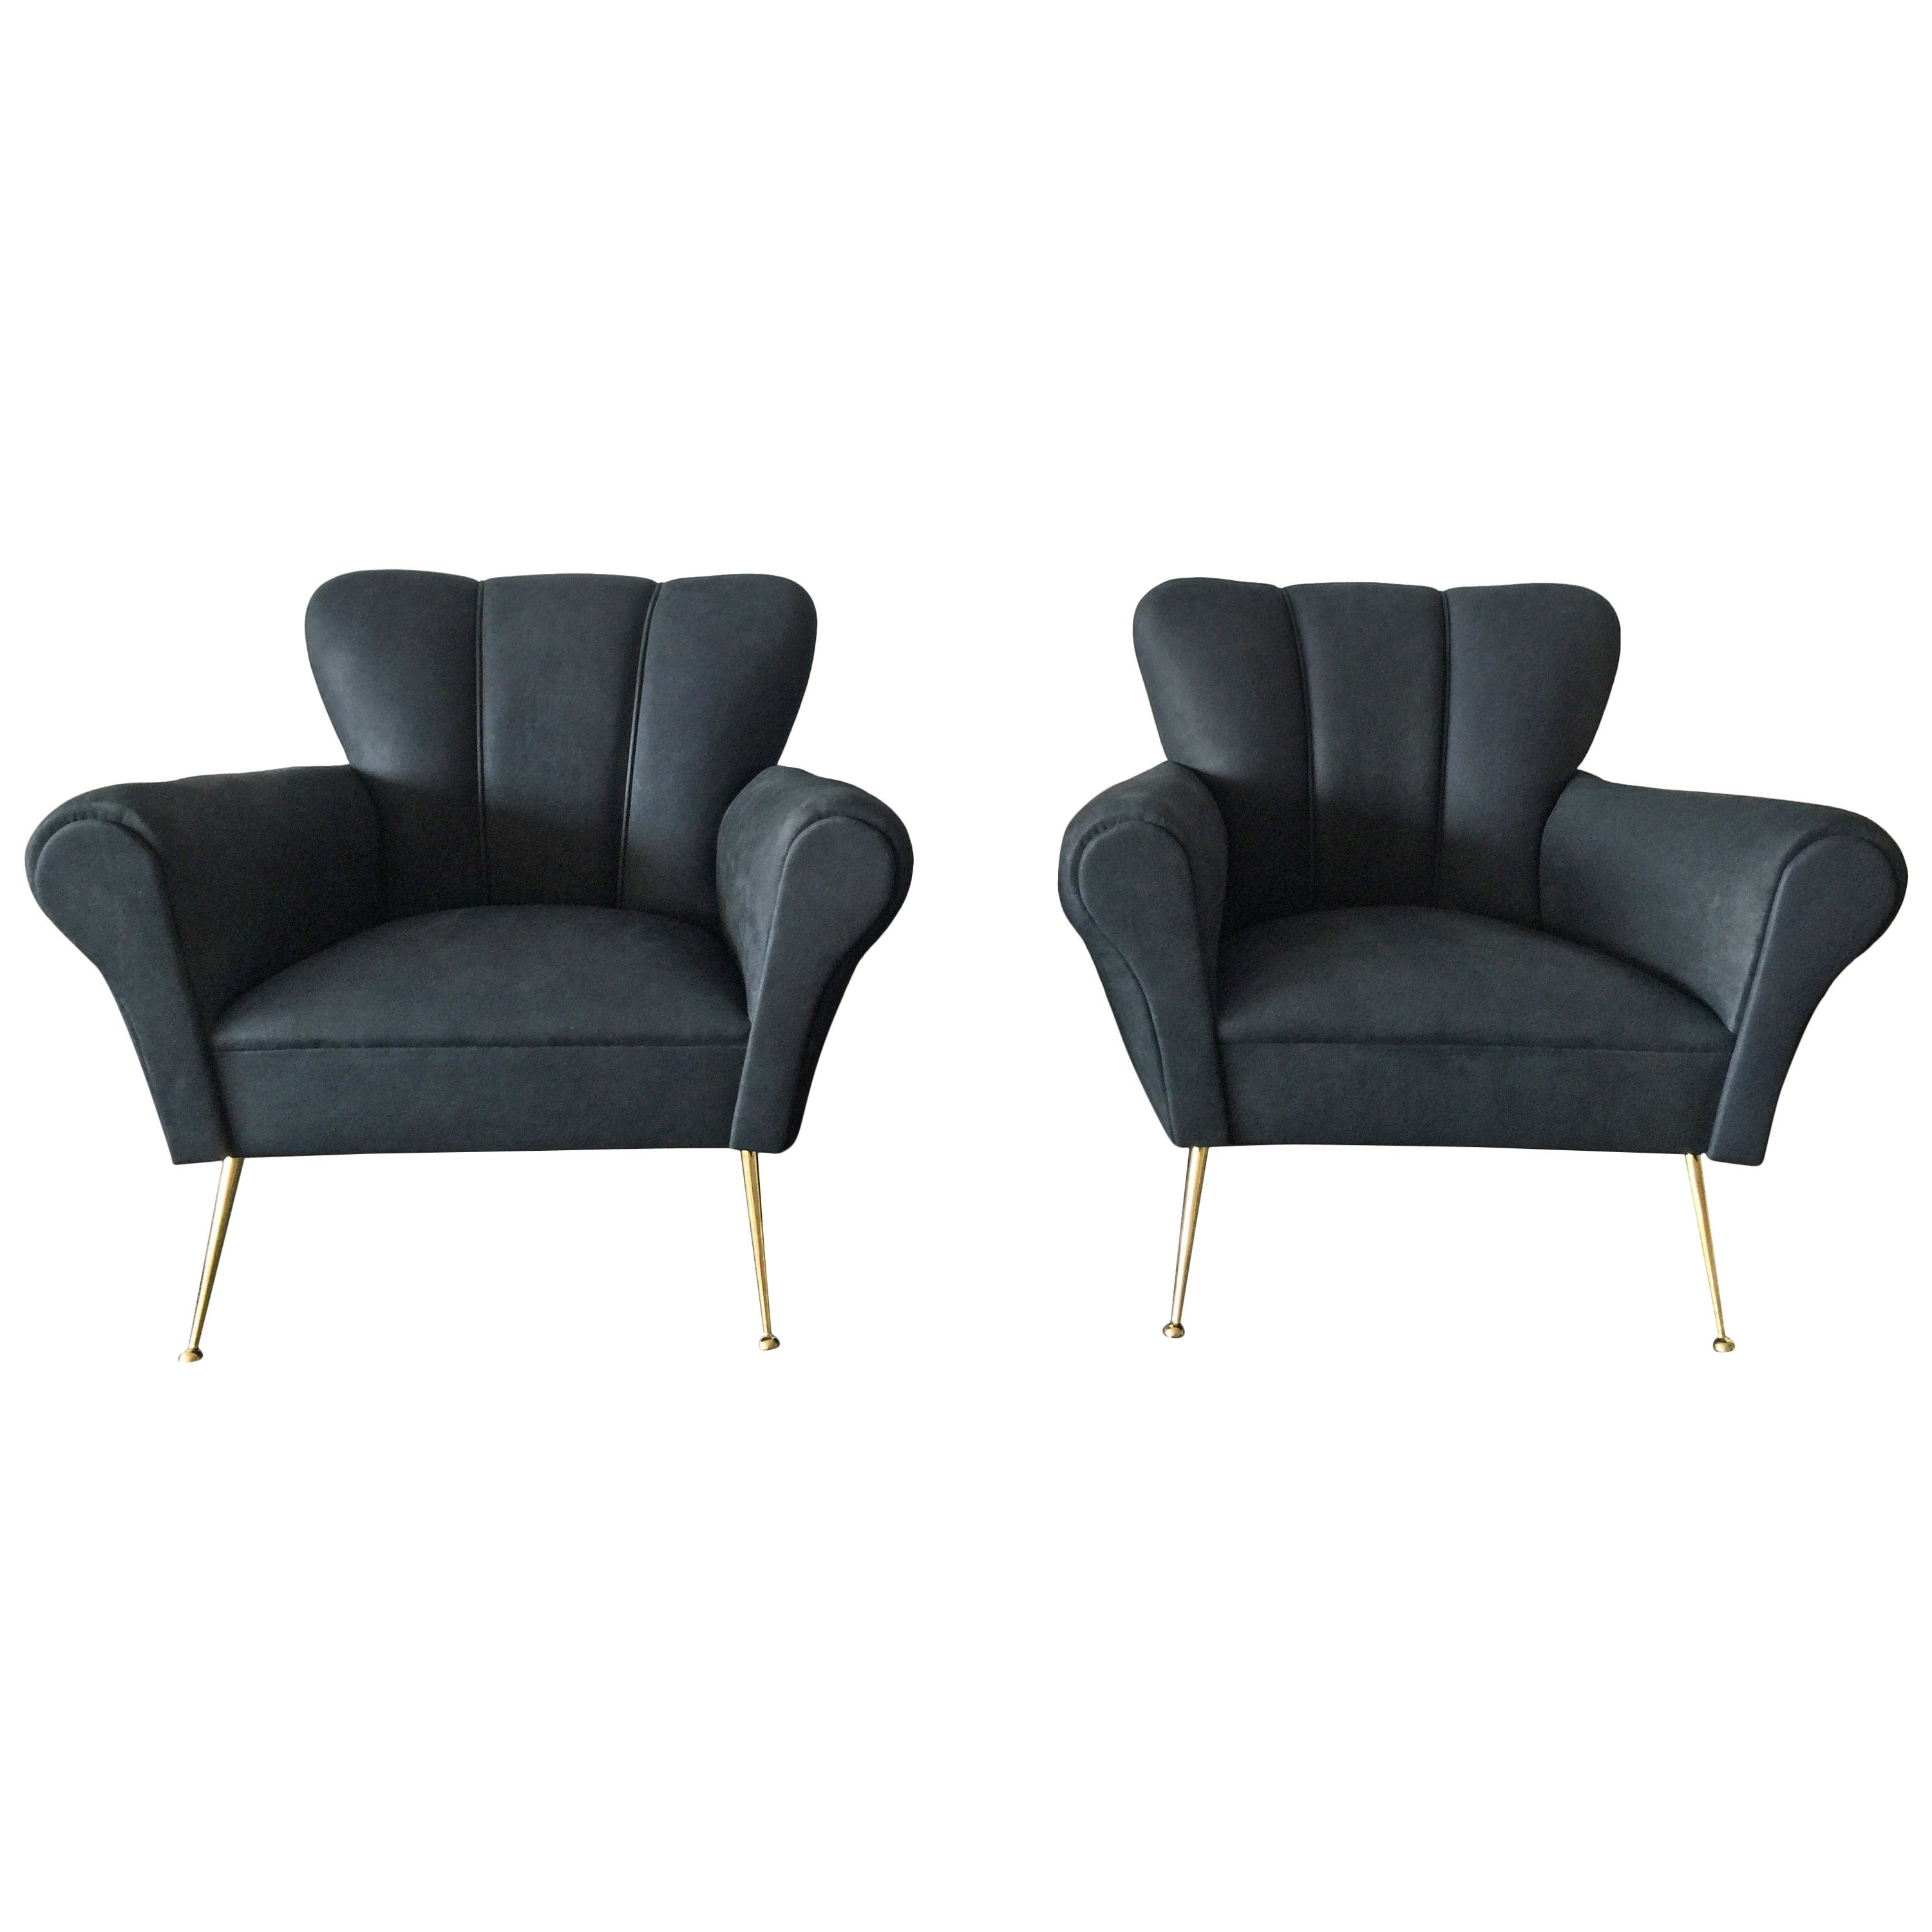 Pair of Italian Armchairs in Petroleum Blue Calfskin Leather 